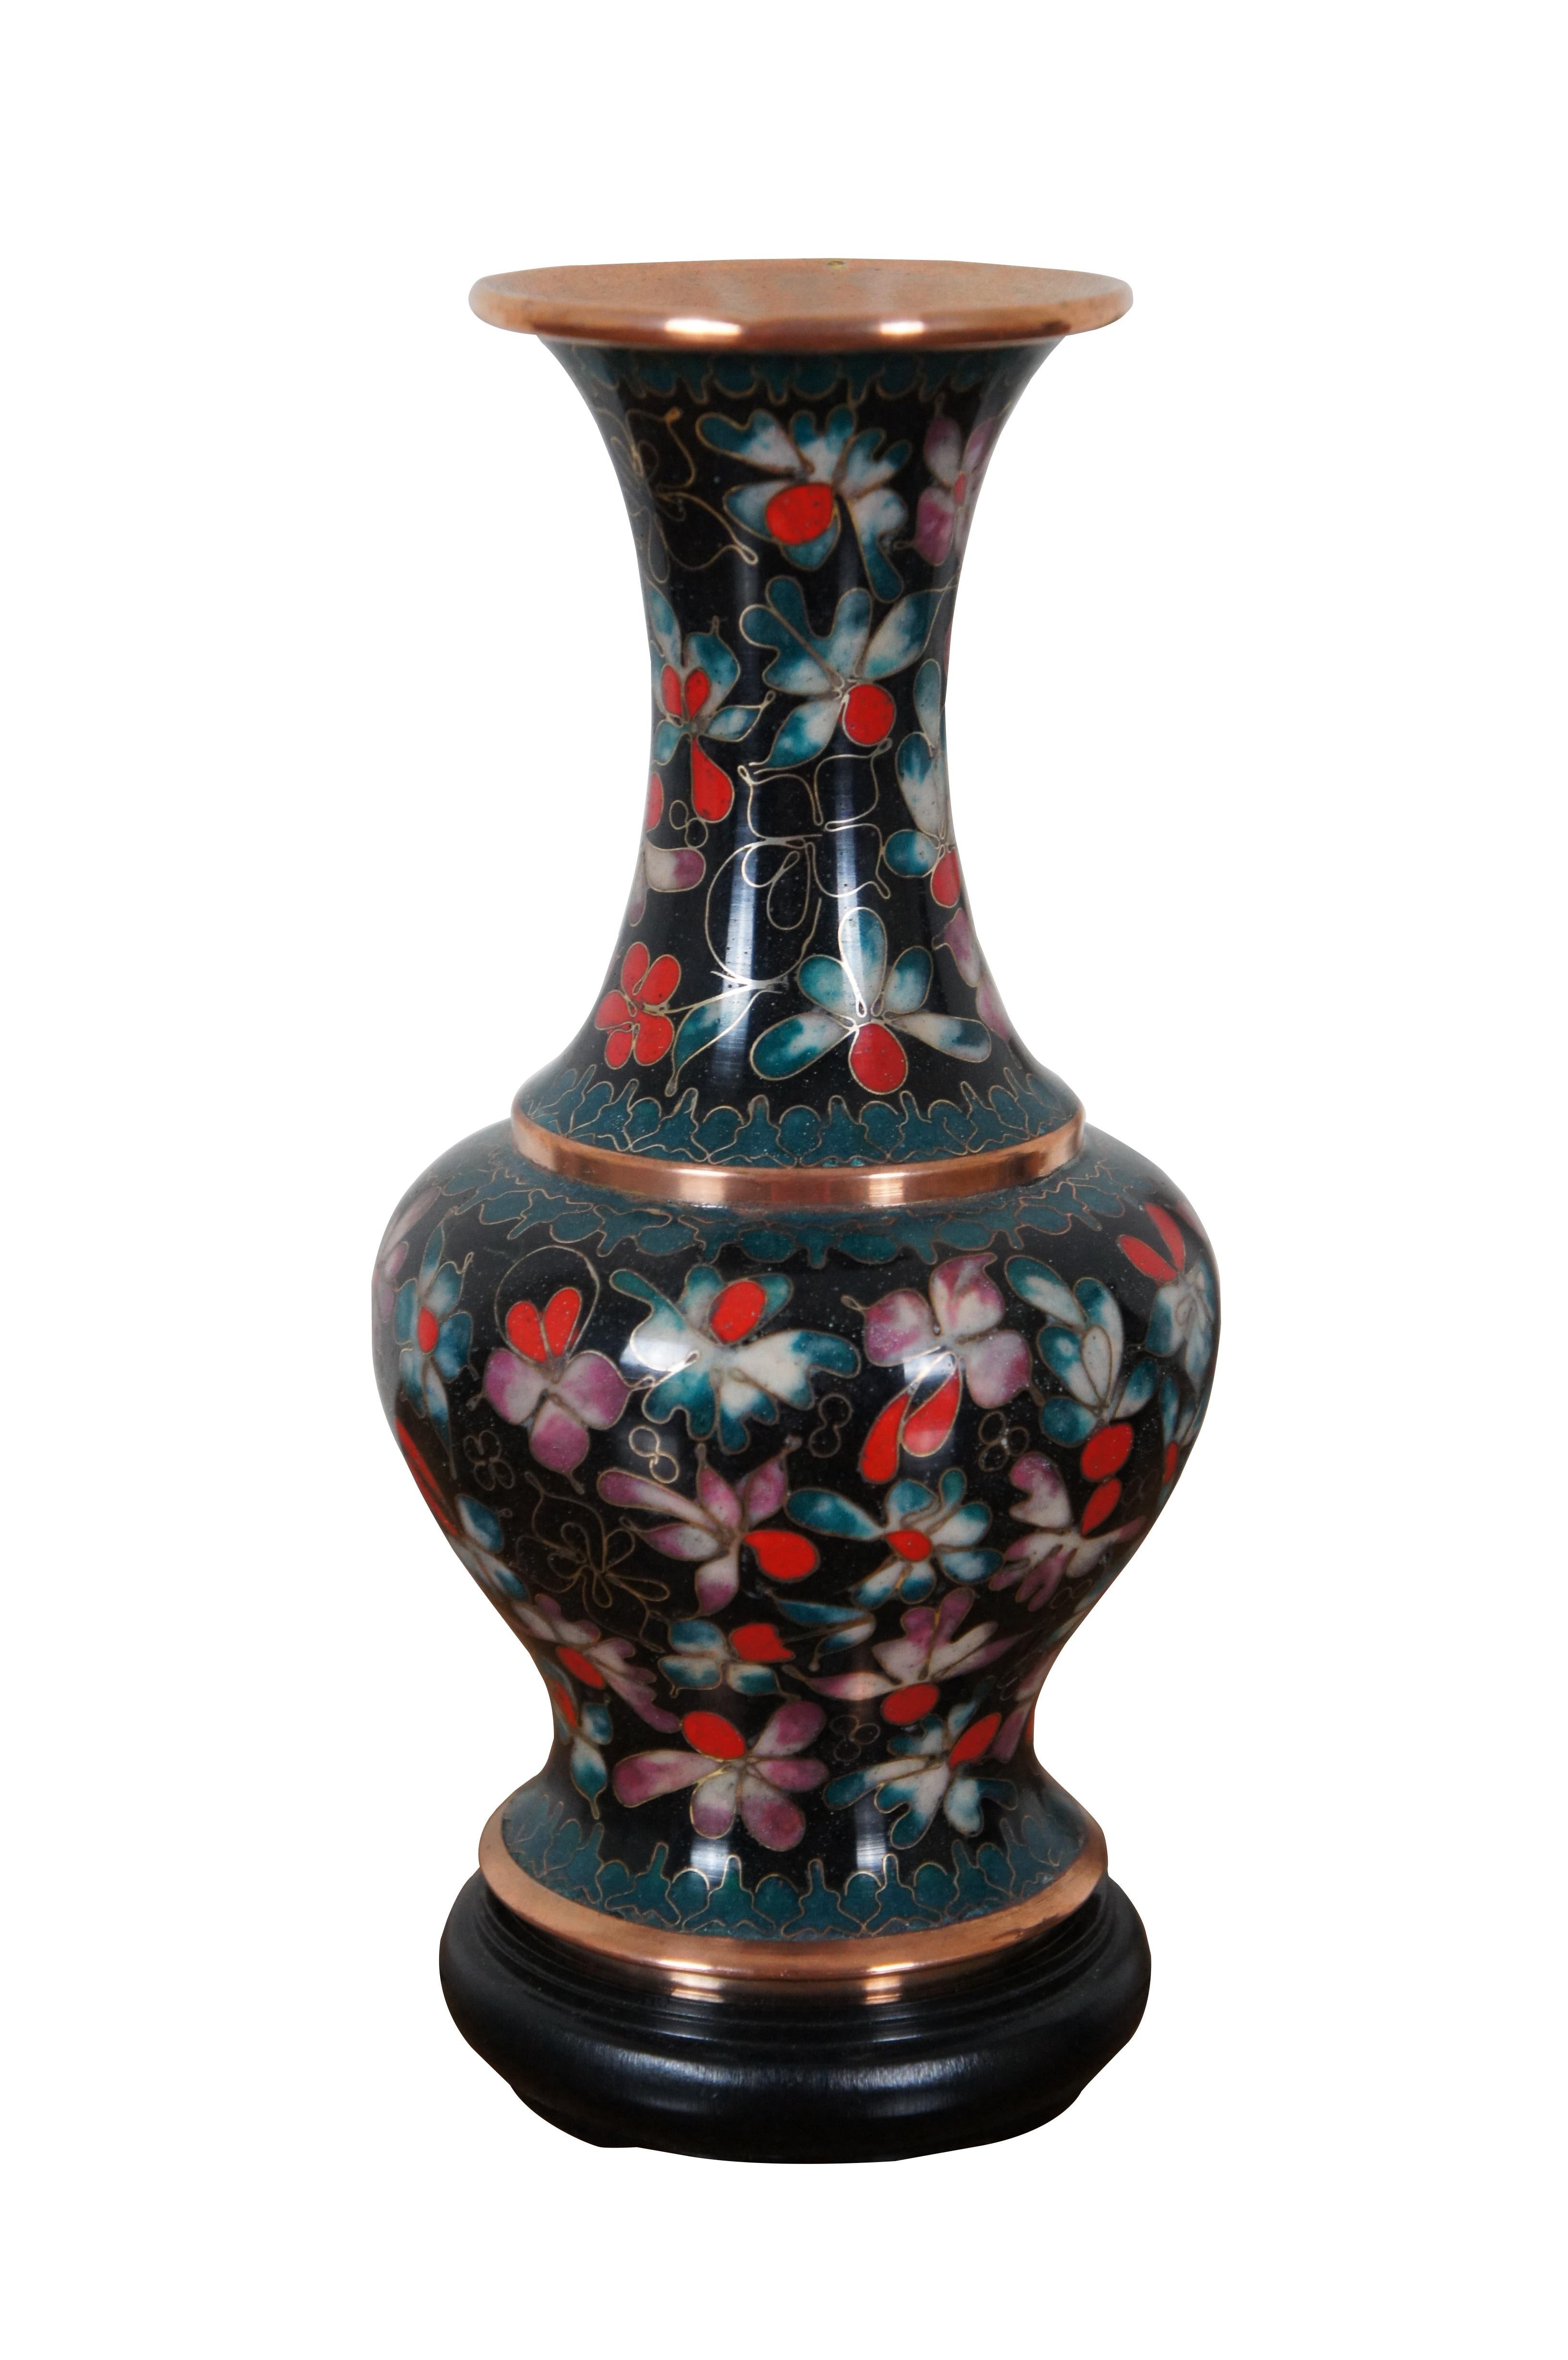 Two vintage Robert Kuo's cloisonne enameled vases or urns featuring a floral motif and flared top.  KUO's China Cloison.  Bases / stands included.

Dimensions:
4.25” x 8.75” (Diameter x Height)